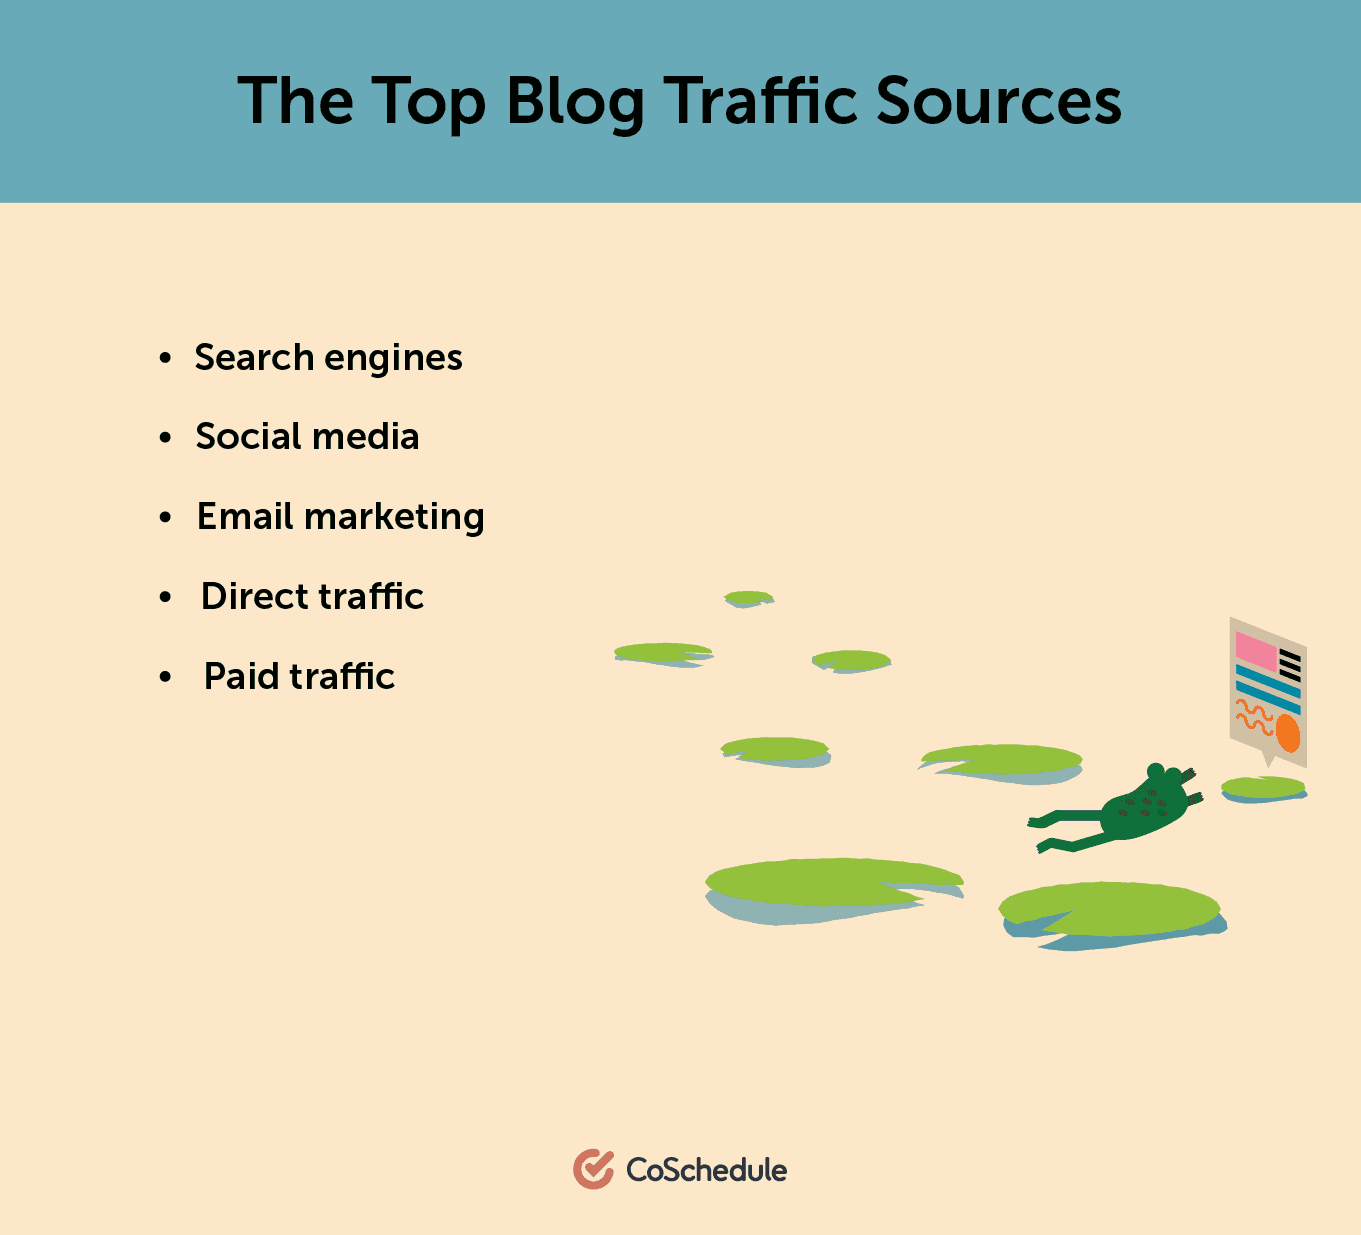 The Top Blog Traffic Sources